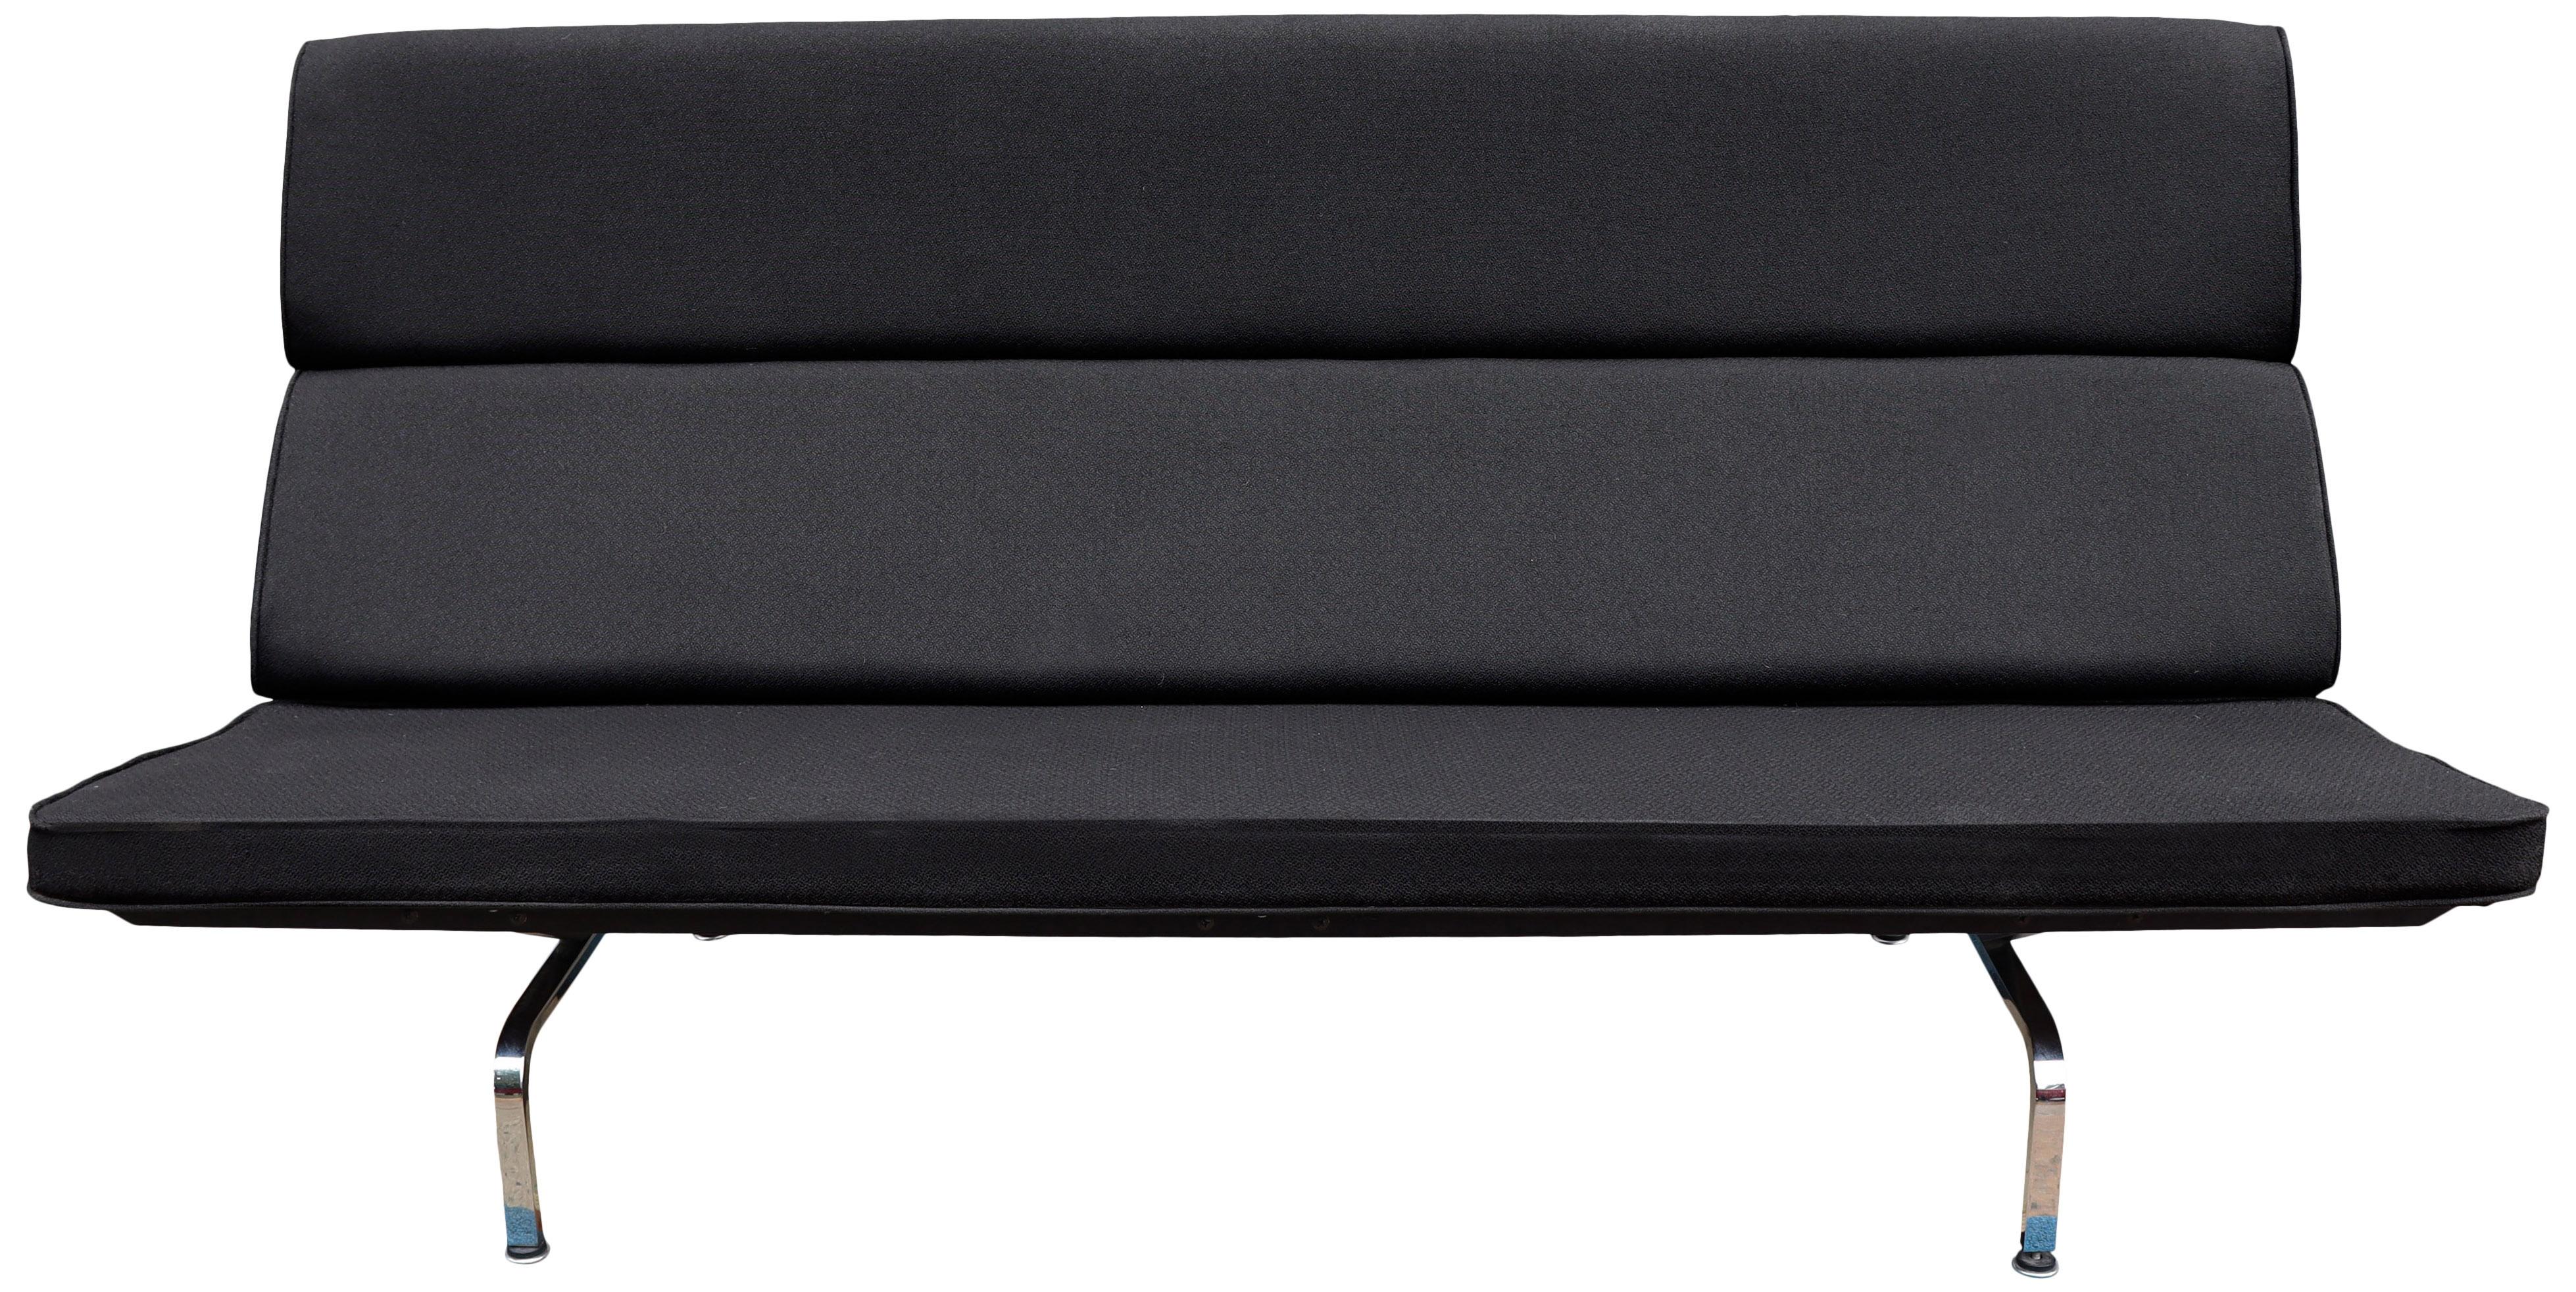 Mid-Century Modern Midcentury Eames Compact Sofa by Ray and Charles Eames for Herman Miller